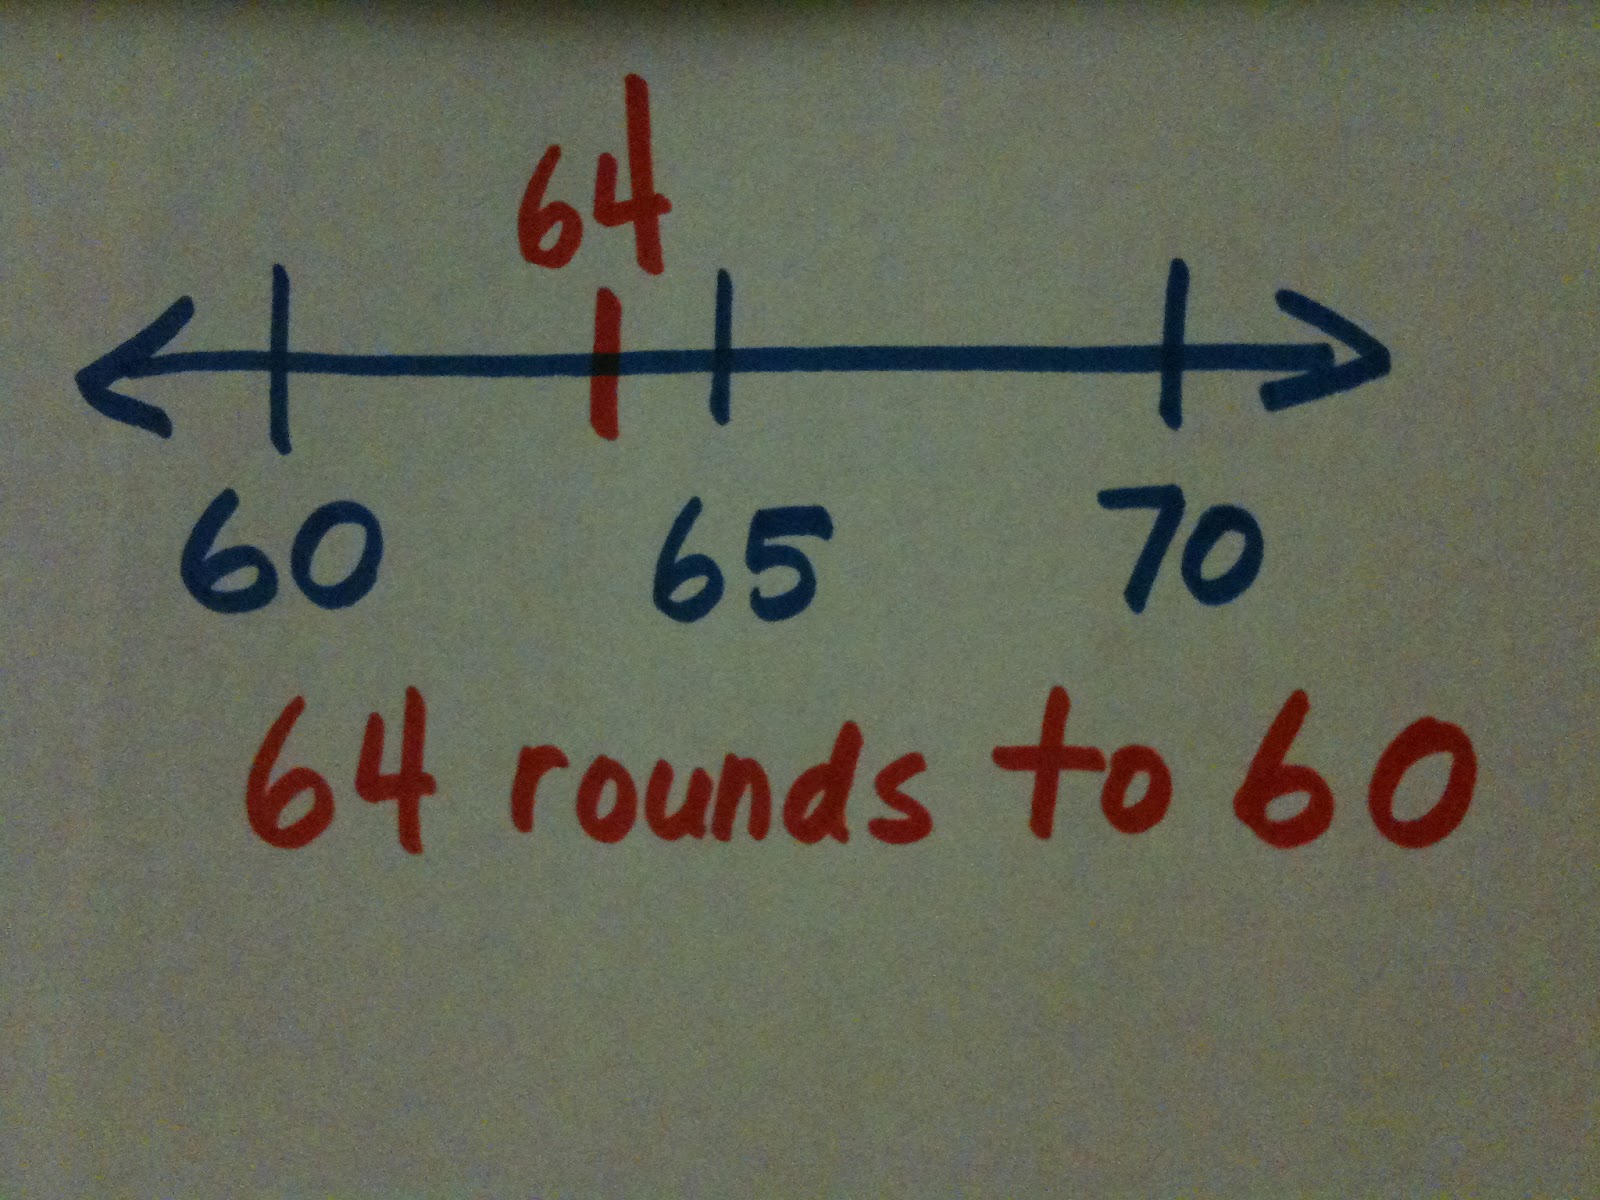 Rounding Numbers On An Open Number Line Worksheets